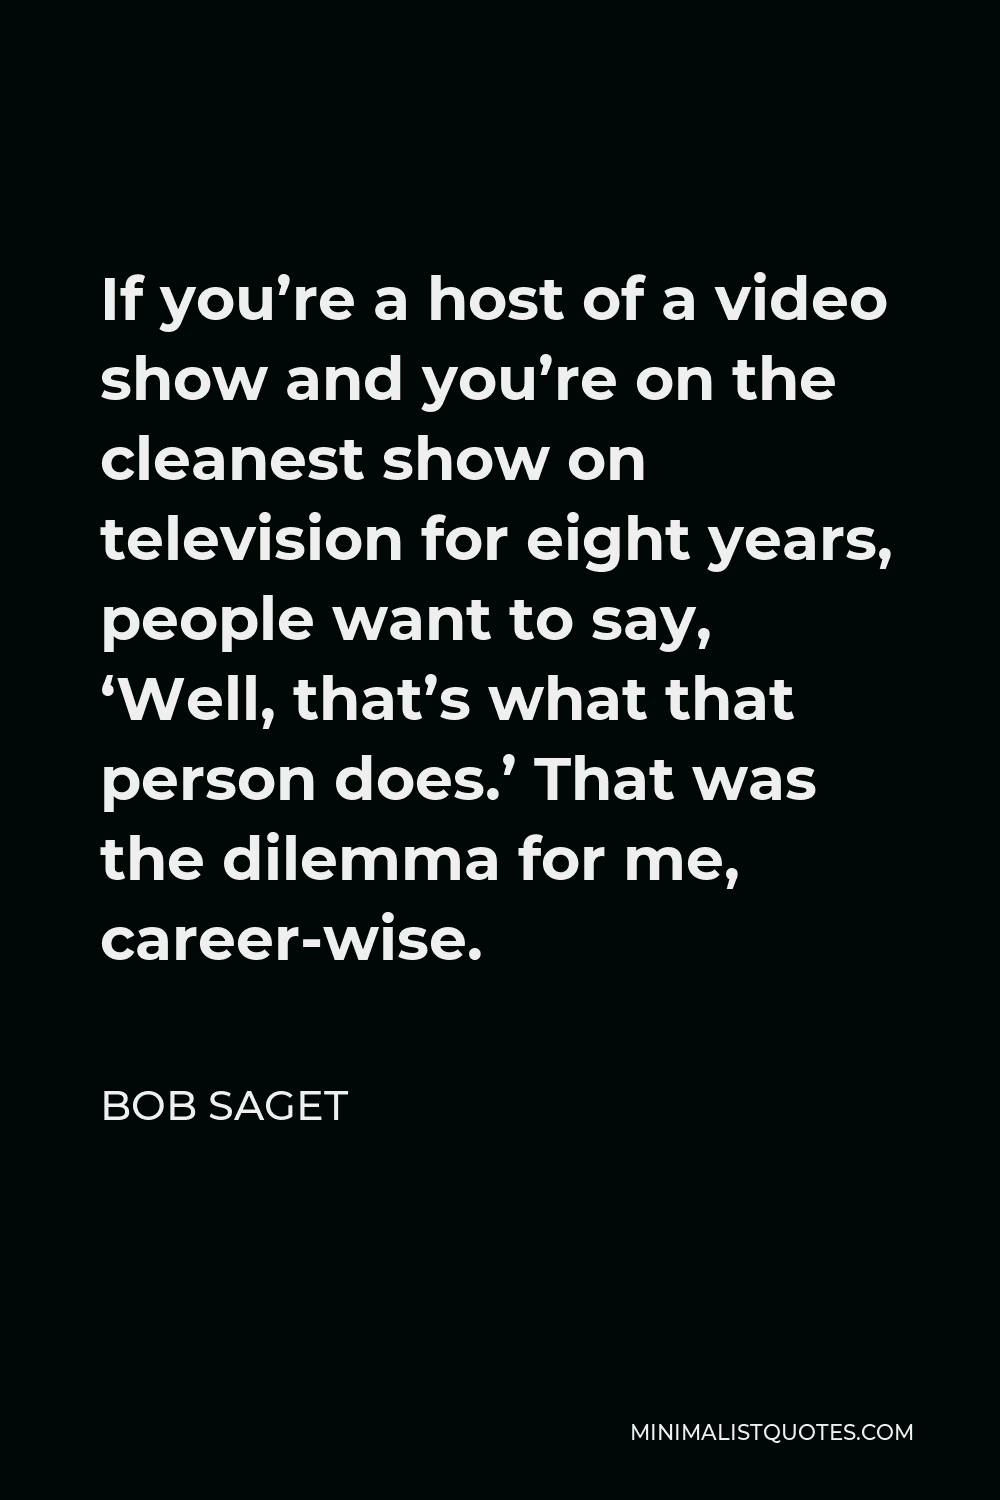 Bob Saget Quote - If you’re a host of a video show and you’re on the cleanest show on television for eight years, people want to say, ‘Well, that’s what that person does.’ That was the dilemma for me, career-wise.